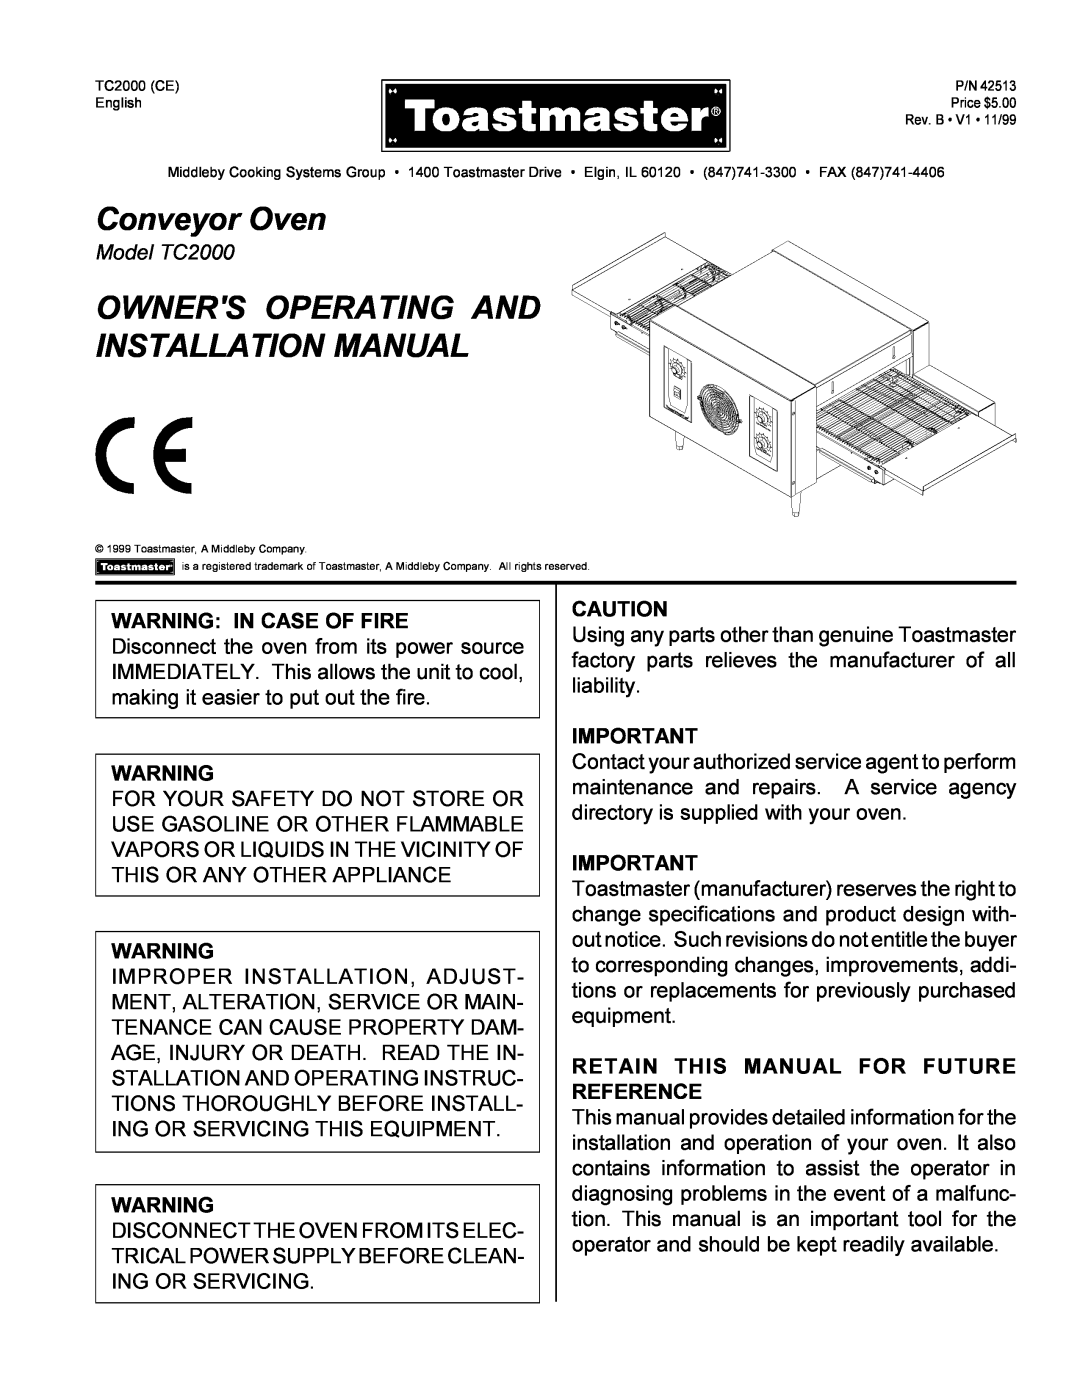 Toastmaster installation manual Conveyor Toaster Oven, Owners Operating And Installation Manual, Model TC2000 